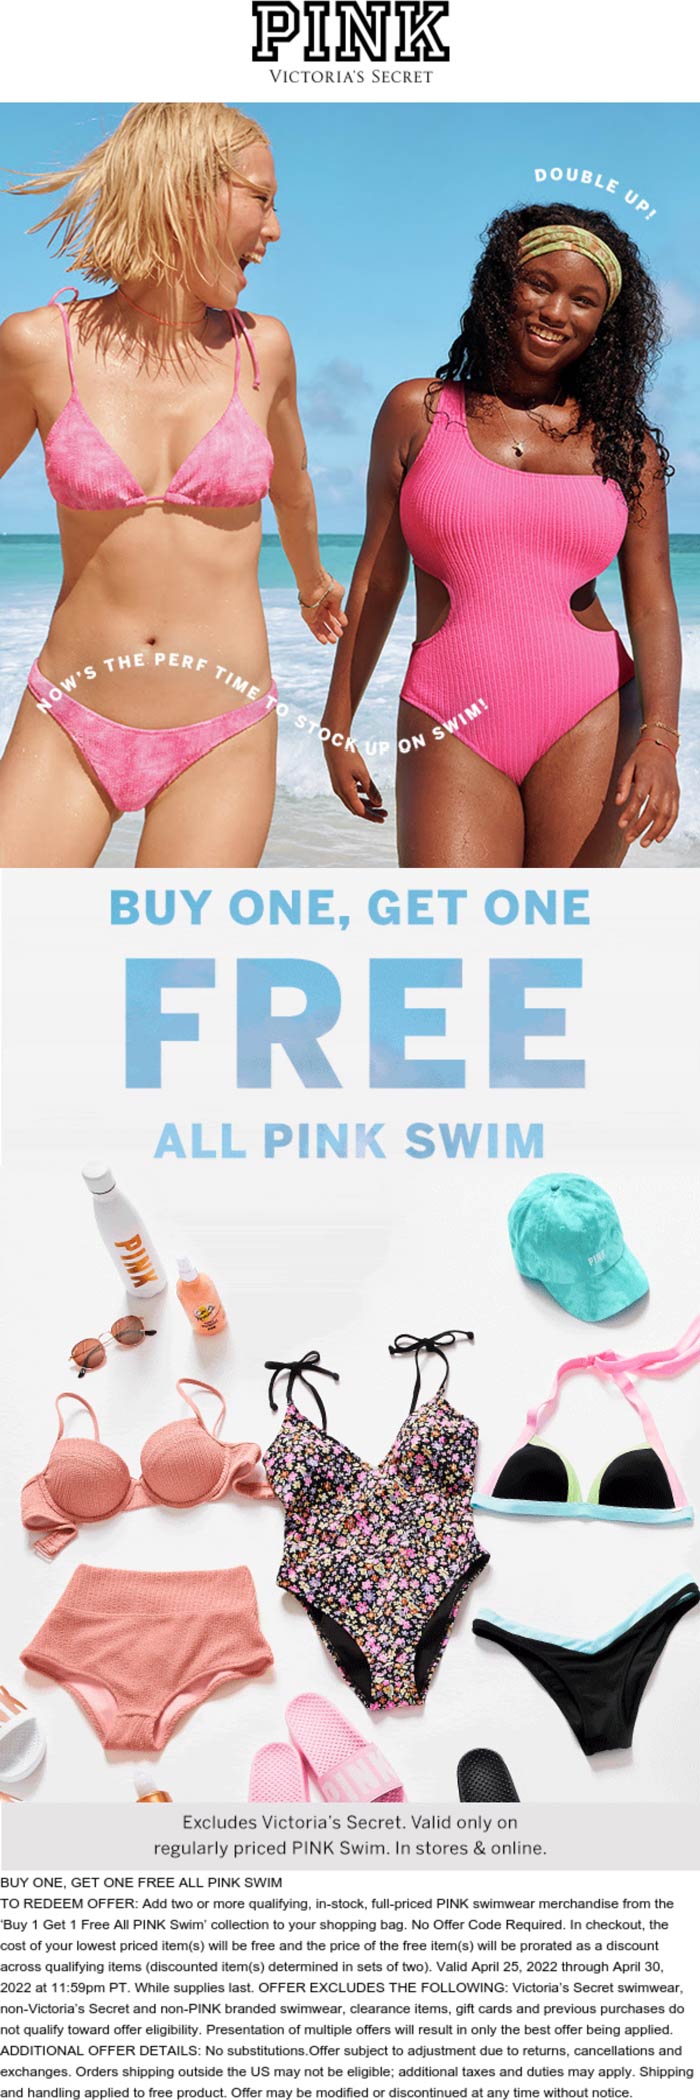 PINK stores Coupon  Second swim free online at PINK #pink 